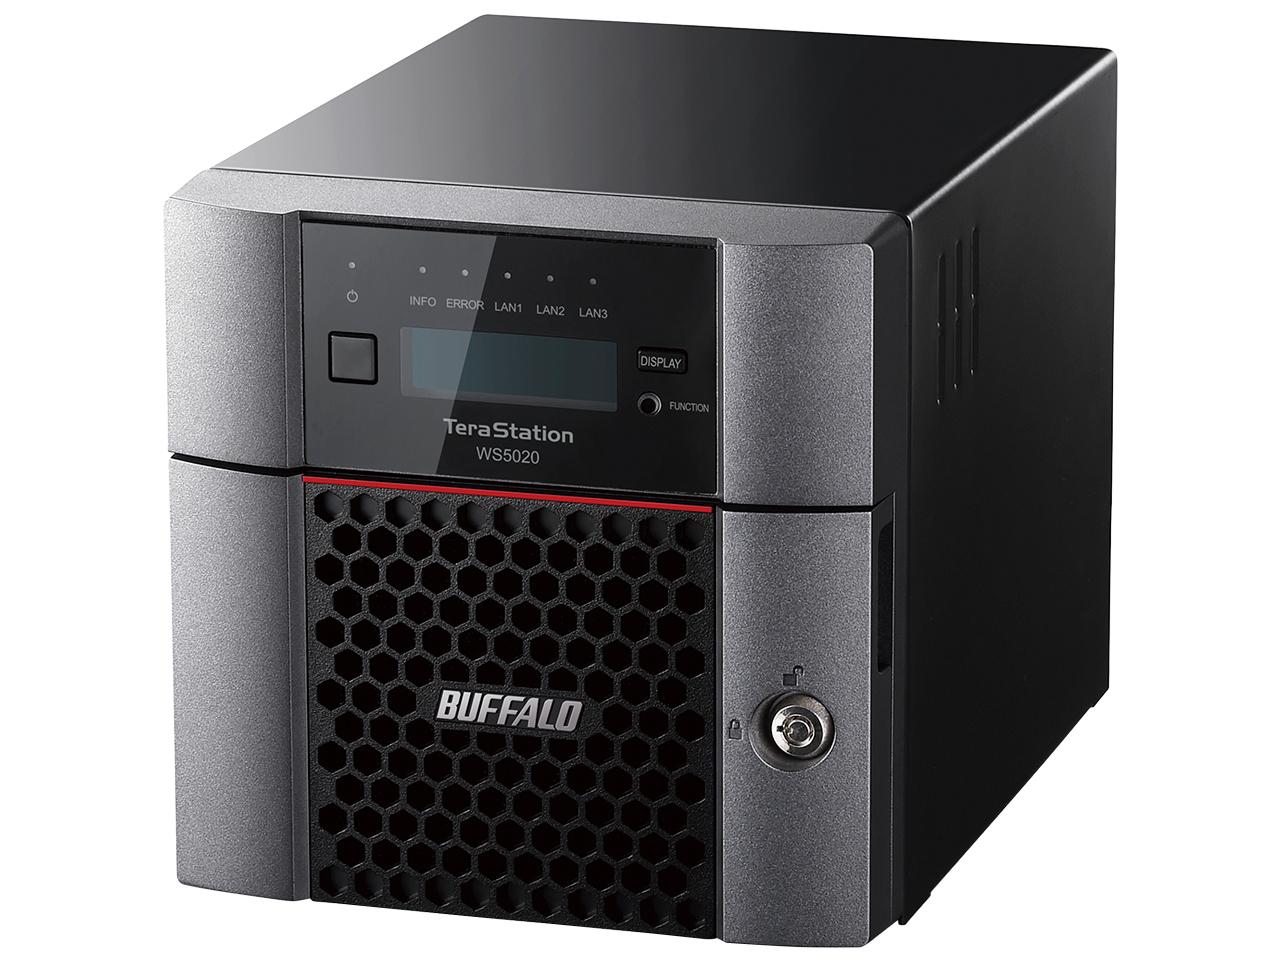 Windows@Server@IoT@2019@for@Storage@Workgroup@Editionځ@2xCfXNgbvNAS@8TB  WS5220DN08W9 1 BUFFALO obt@[